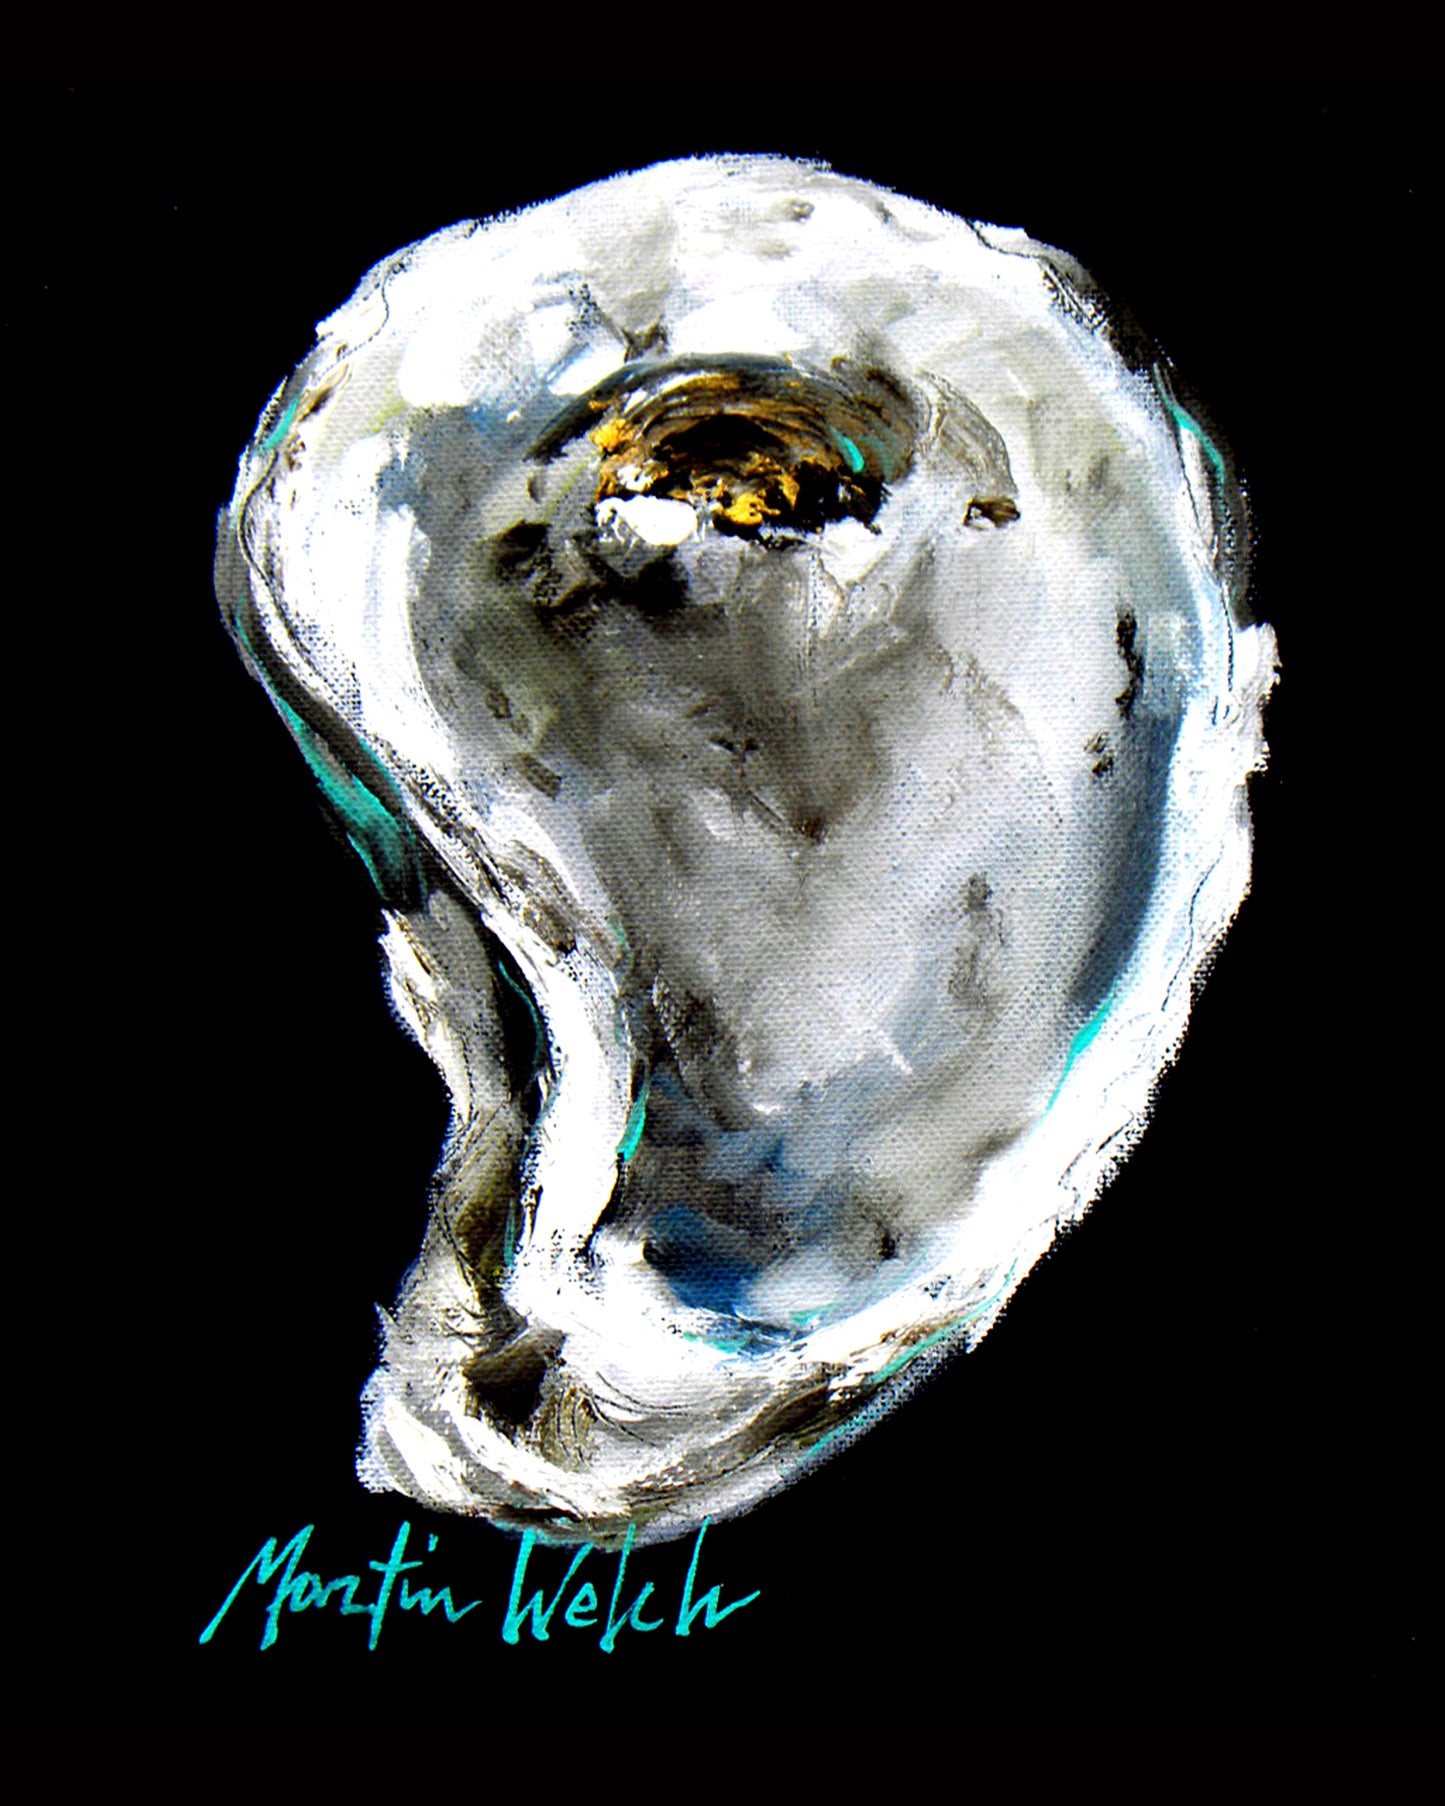 Lucky Oyster - Oyster Shell - 11"x14" Print